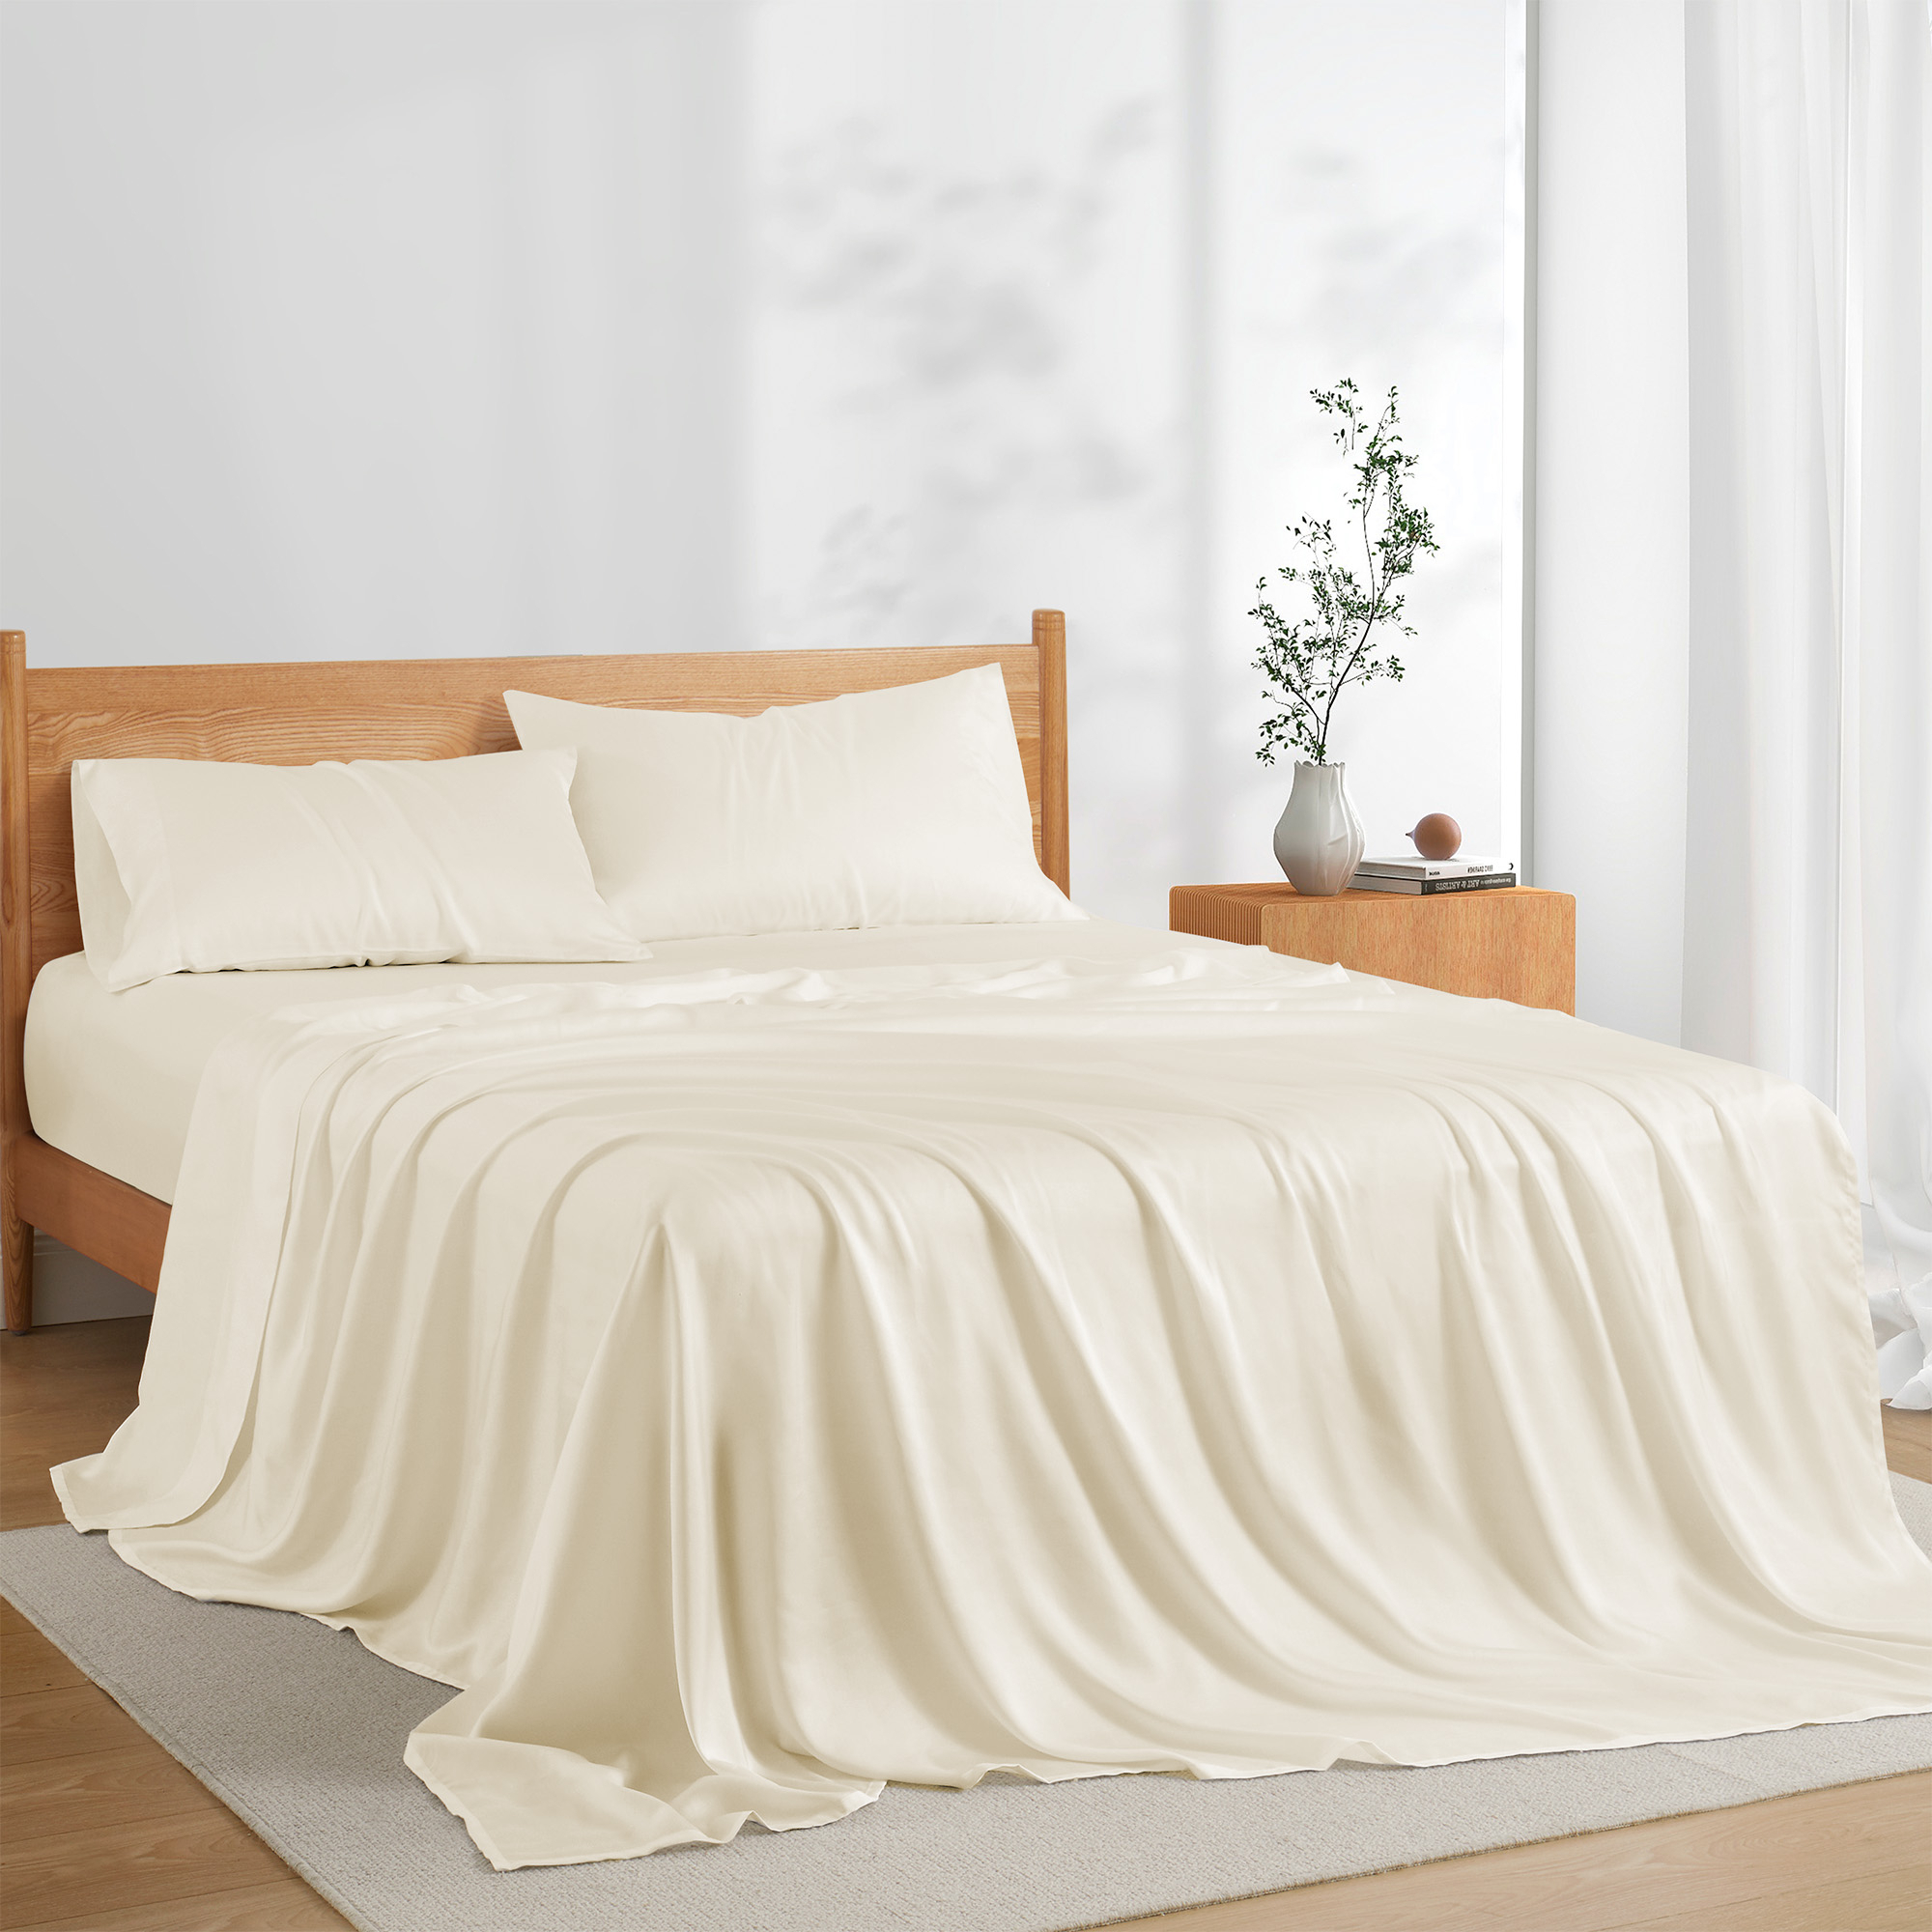 Naturally Cooling, Soft, And Breathable Tencel Lyocell 4Pc Sheets Set - Twin Size